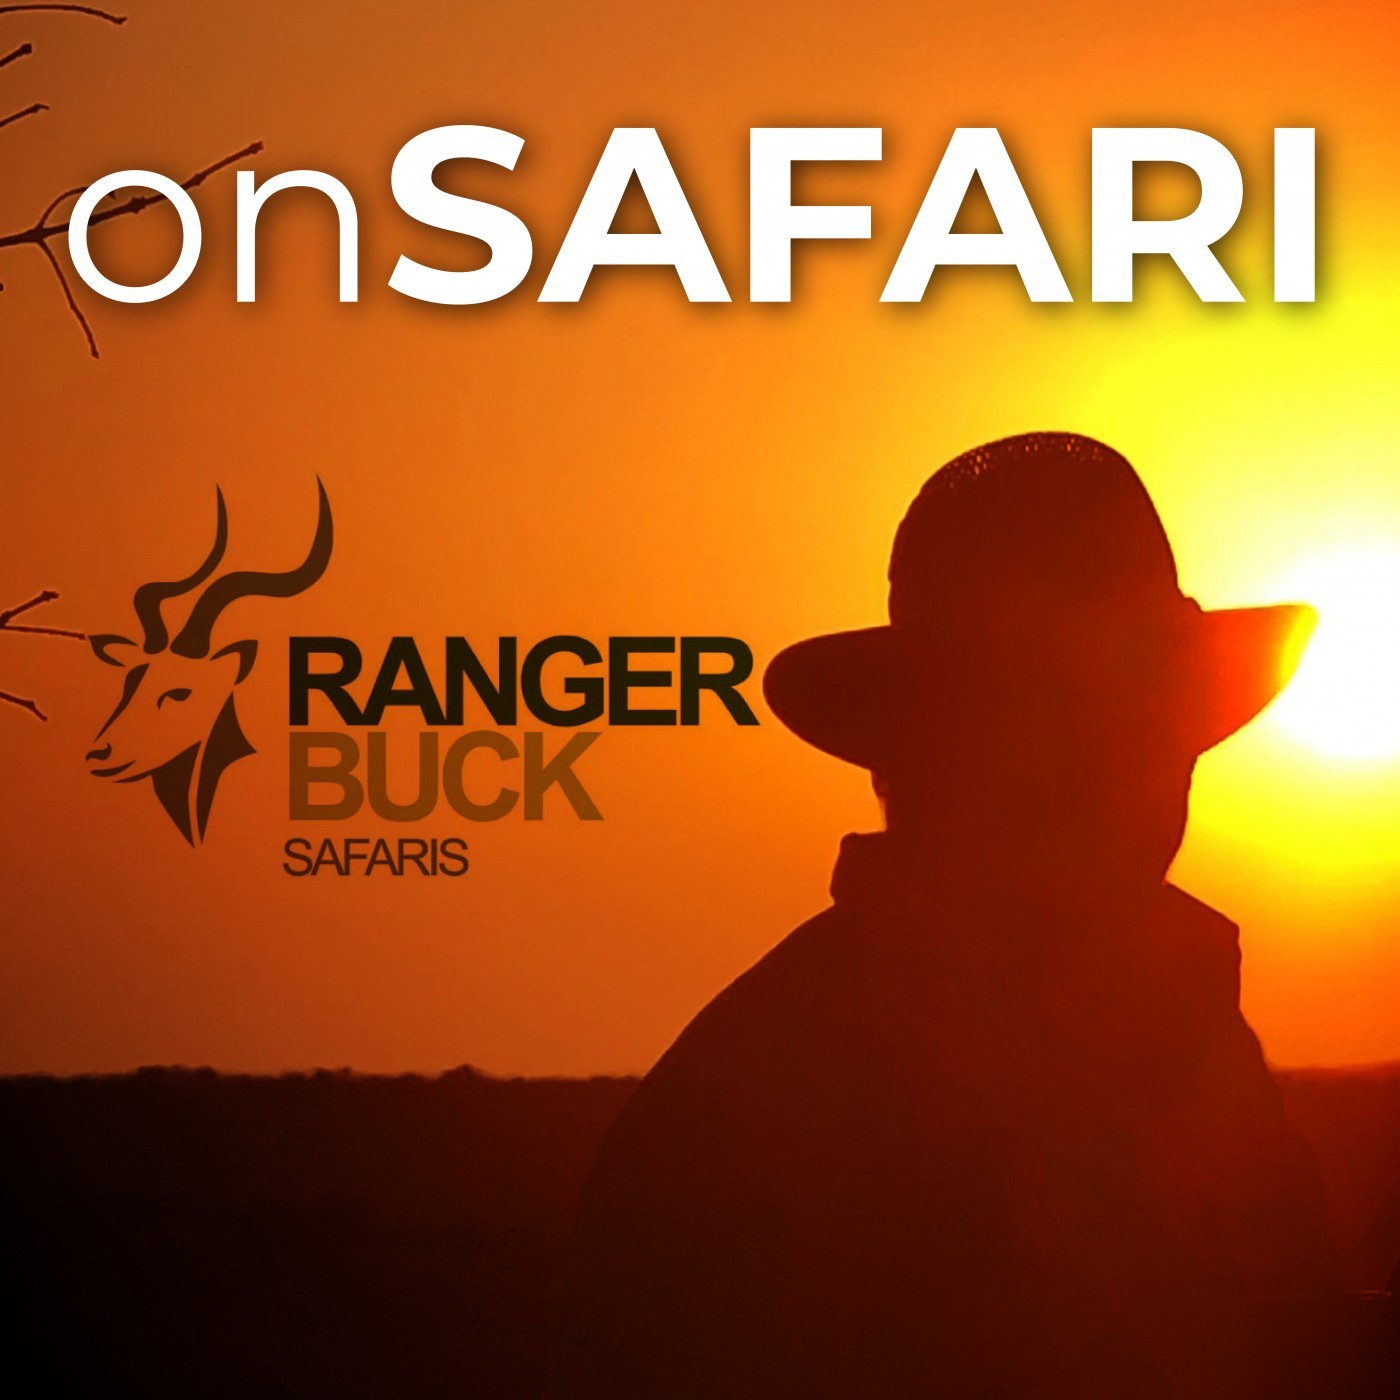 EP06: The best times of the year to go on Safari